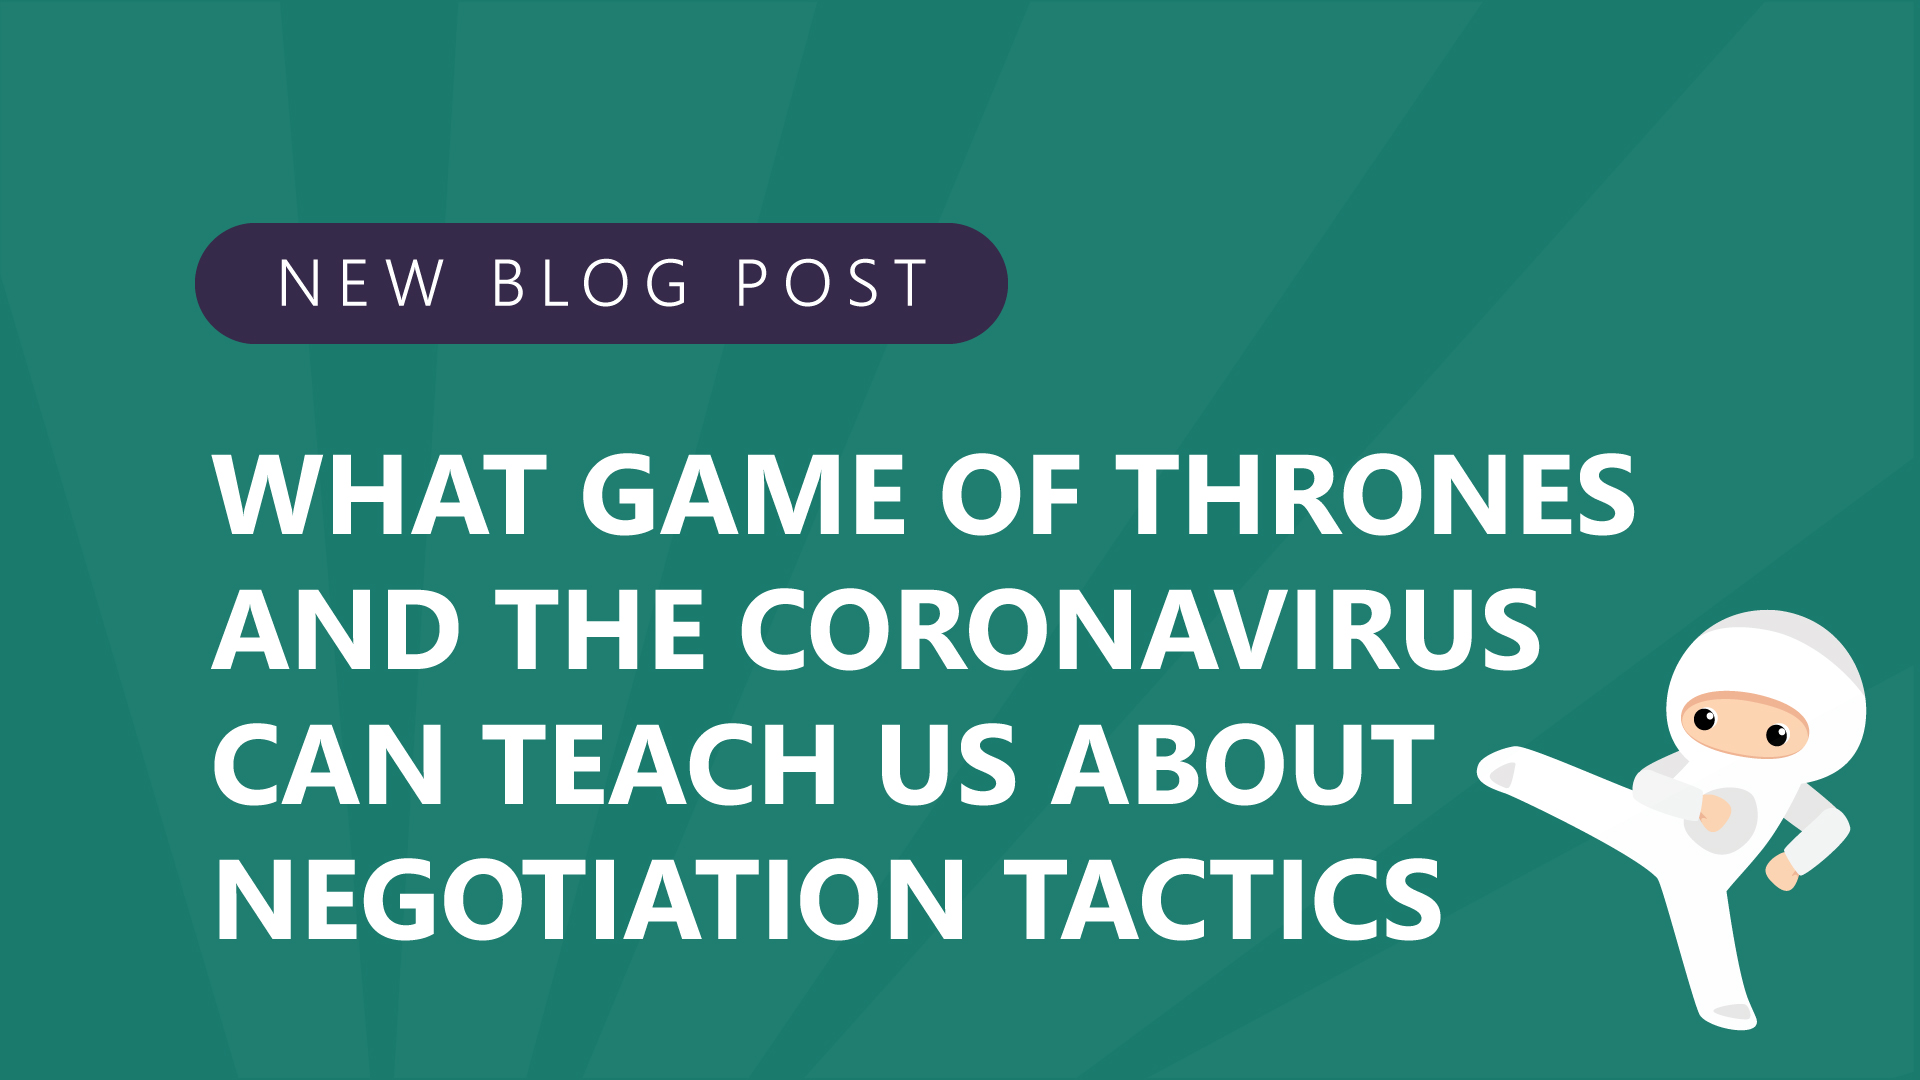 83-What-Game-of-Thrones-and-the-Coronavirus-Can-Teach-Us-About-Negotiation-Tactics.jpg